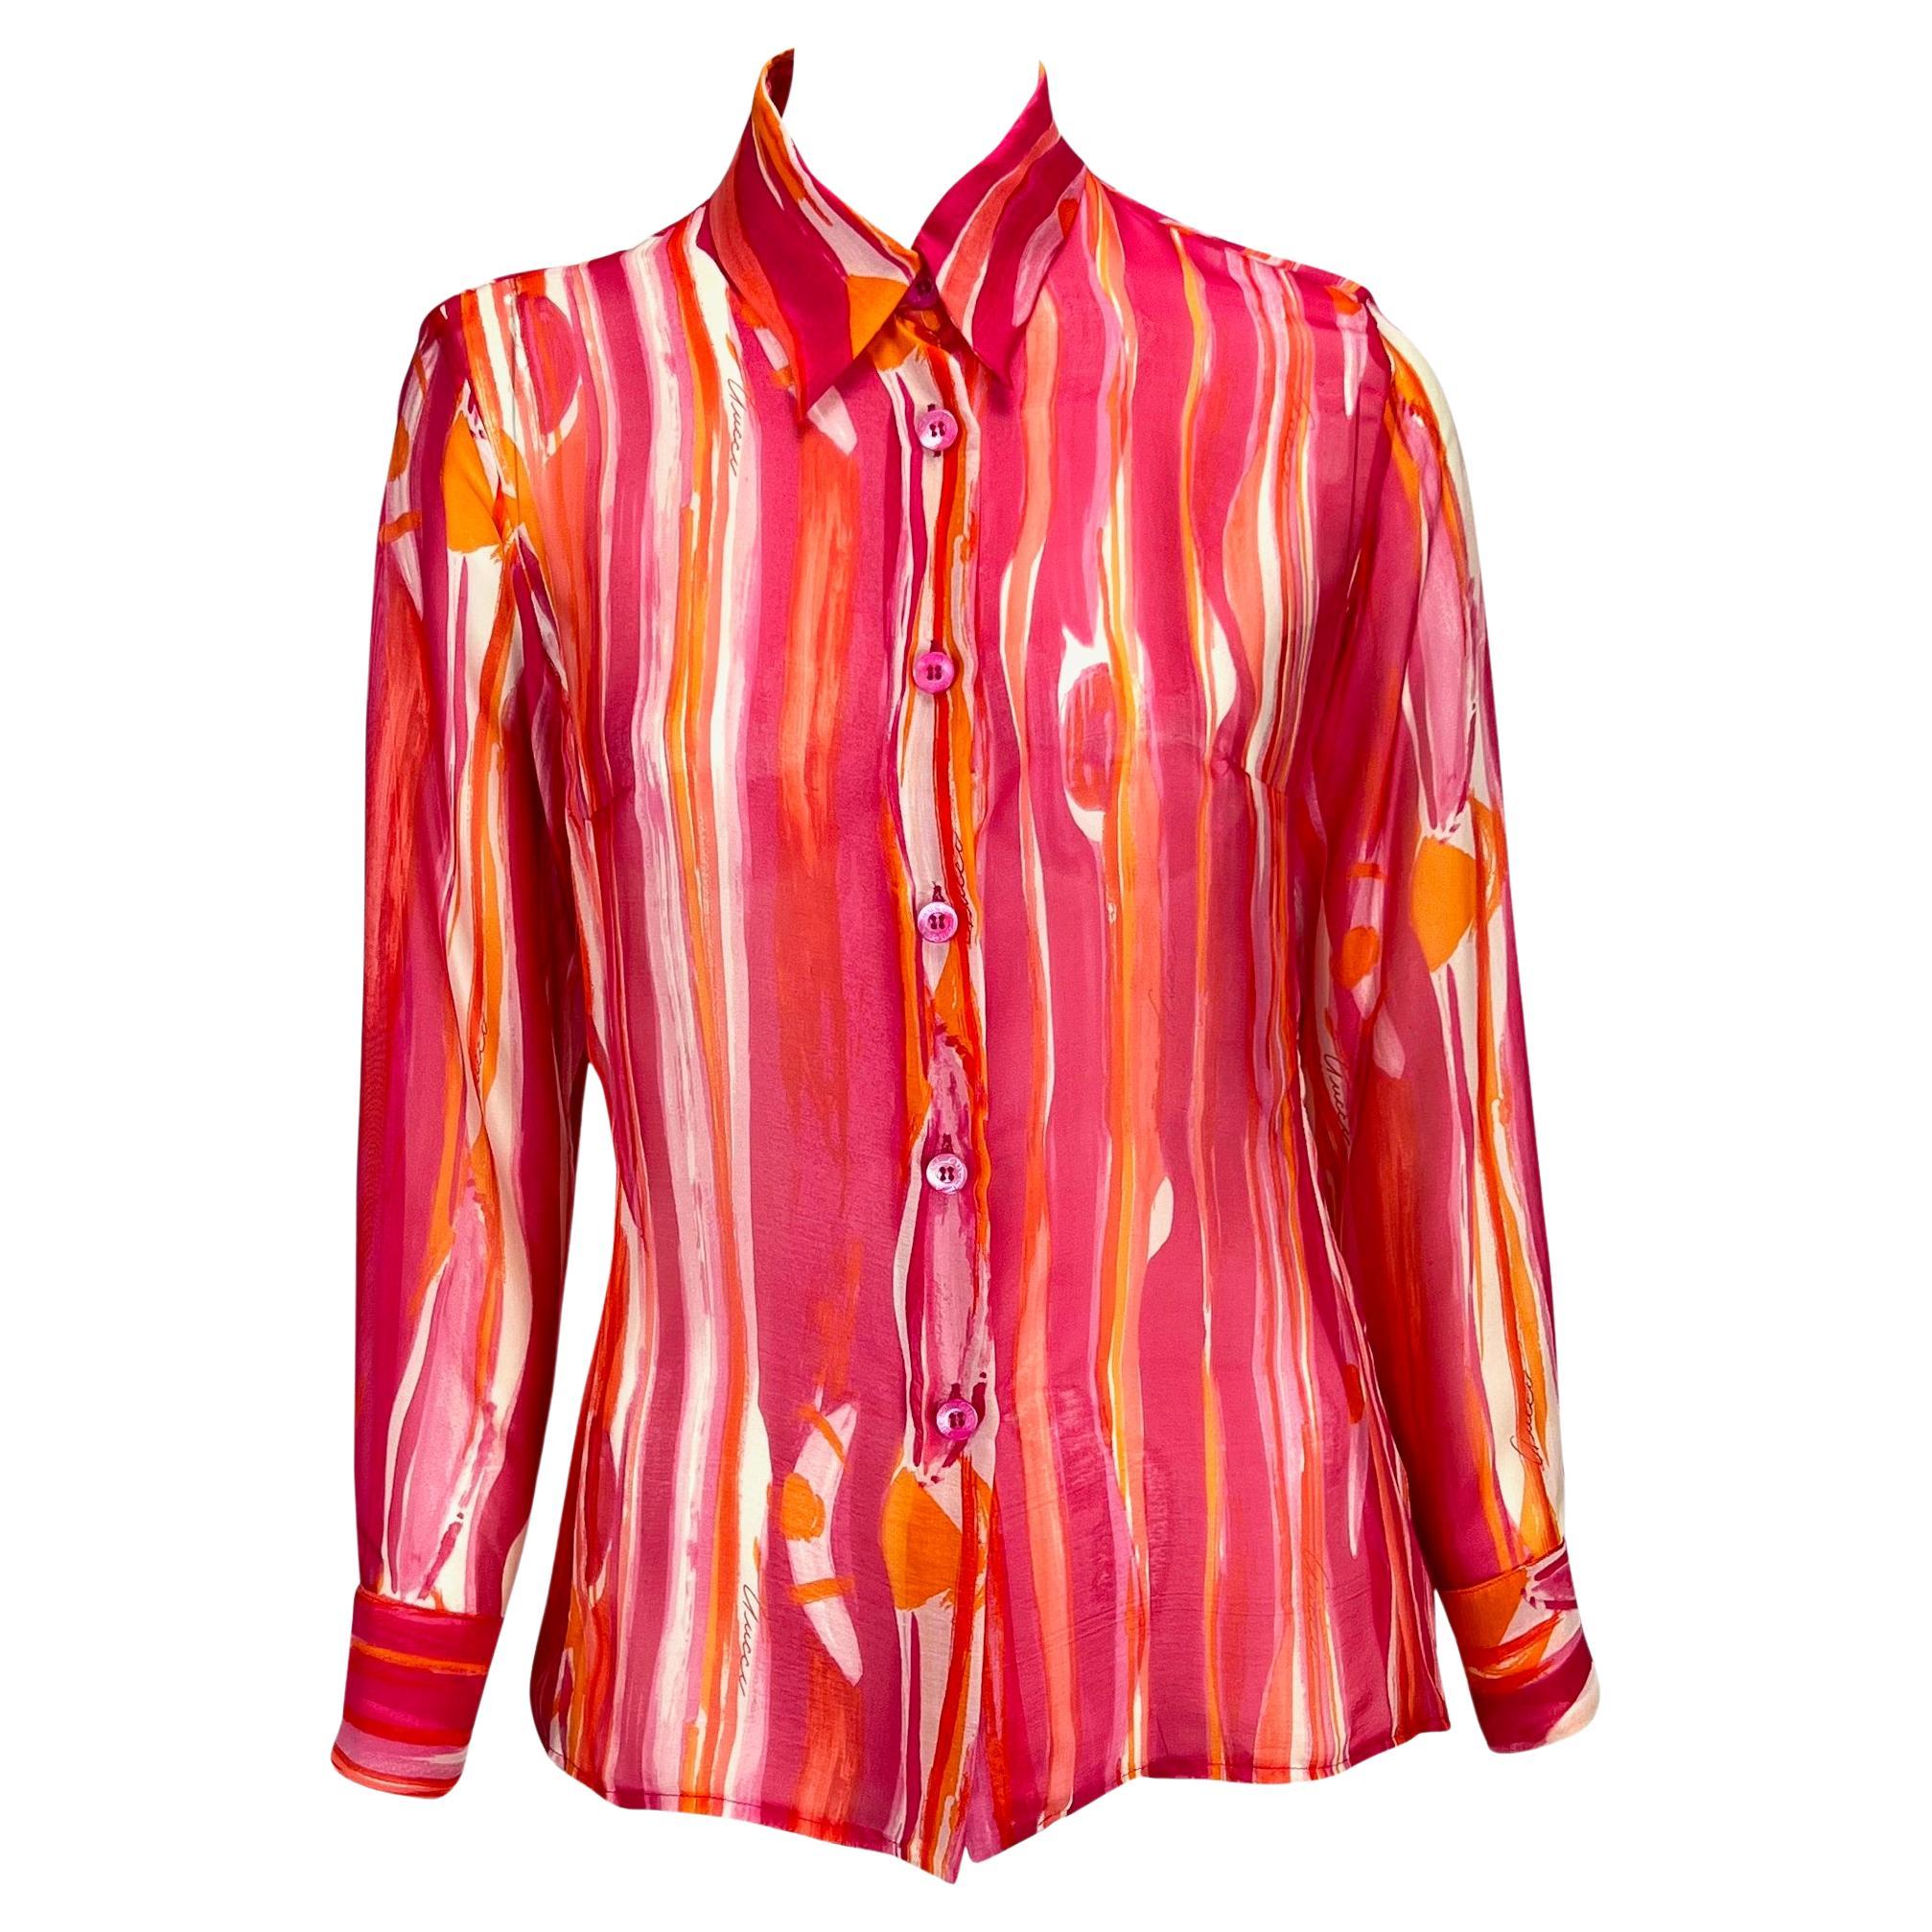 S/S 1996 Gucci by Tom Ford Pink Orange Sheer Abstract Watercolor Button Up Top For Sale